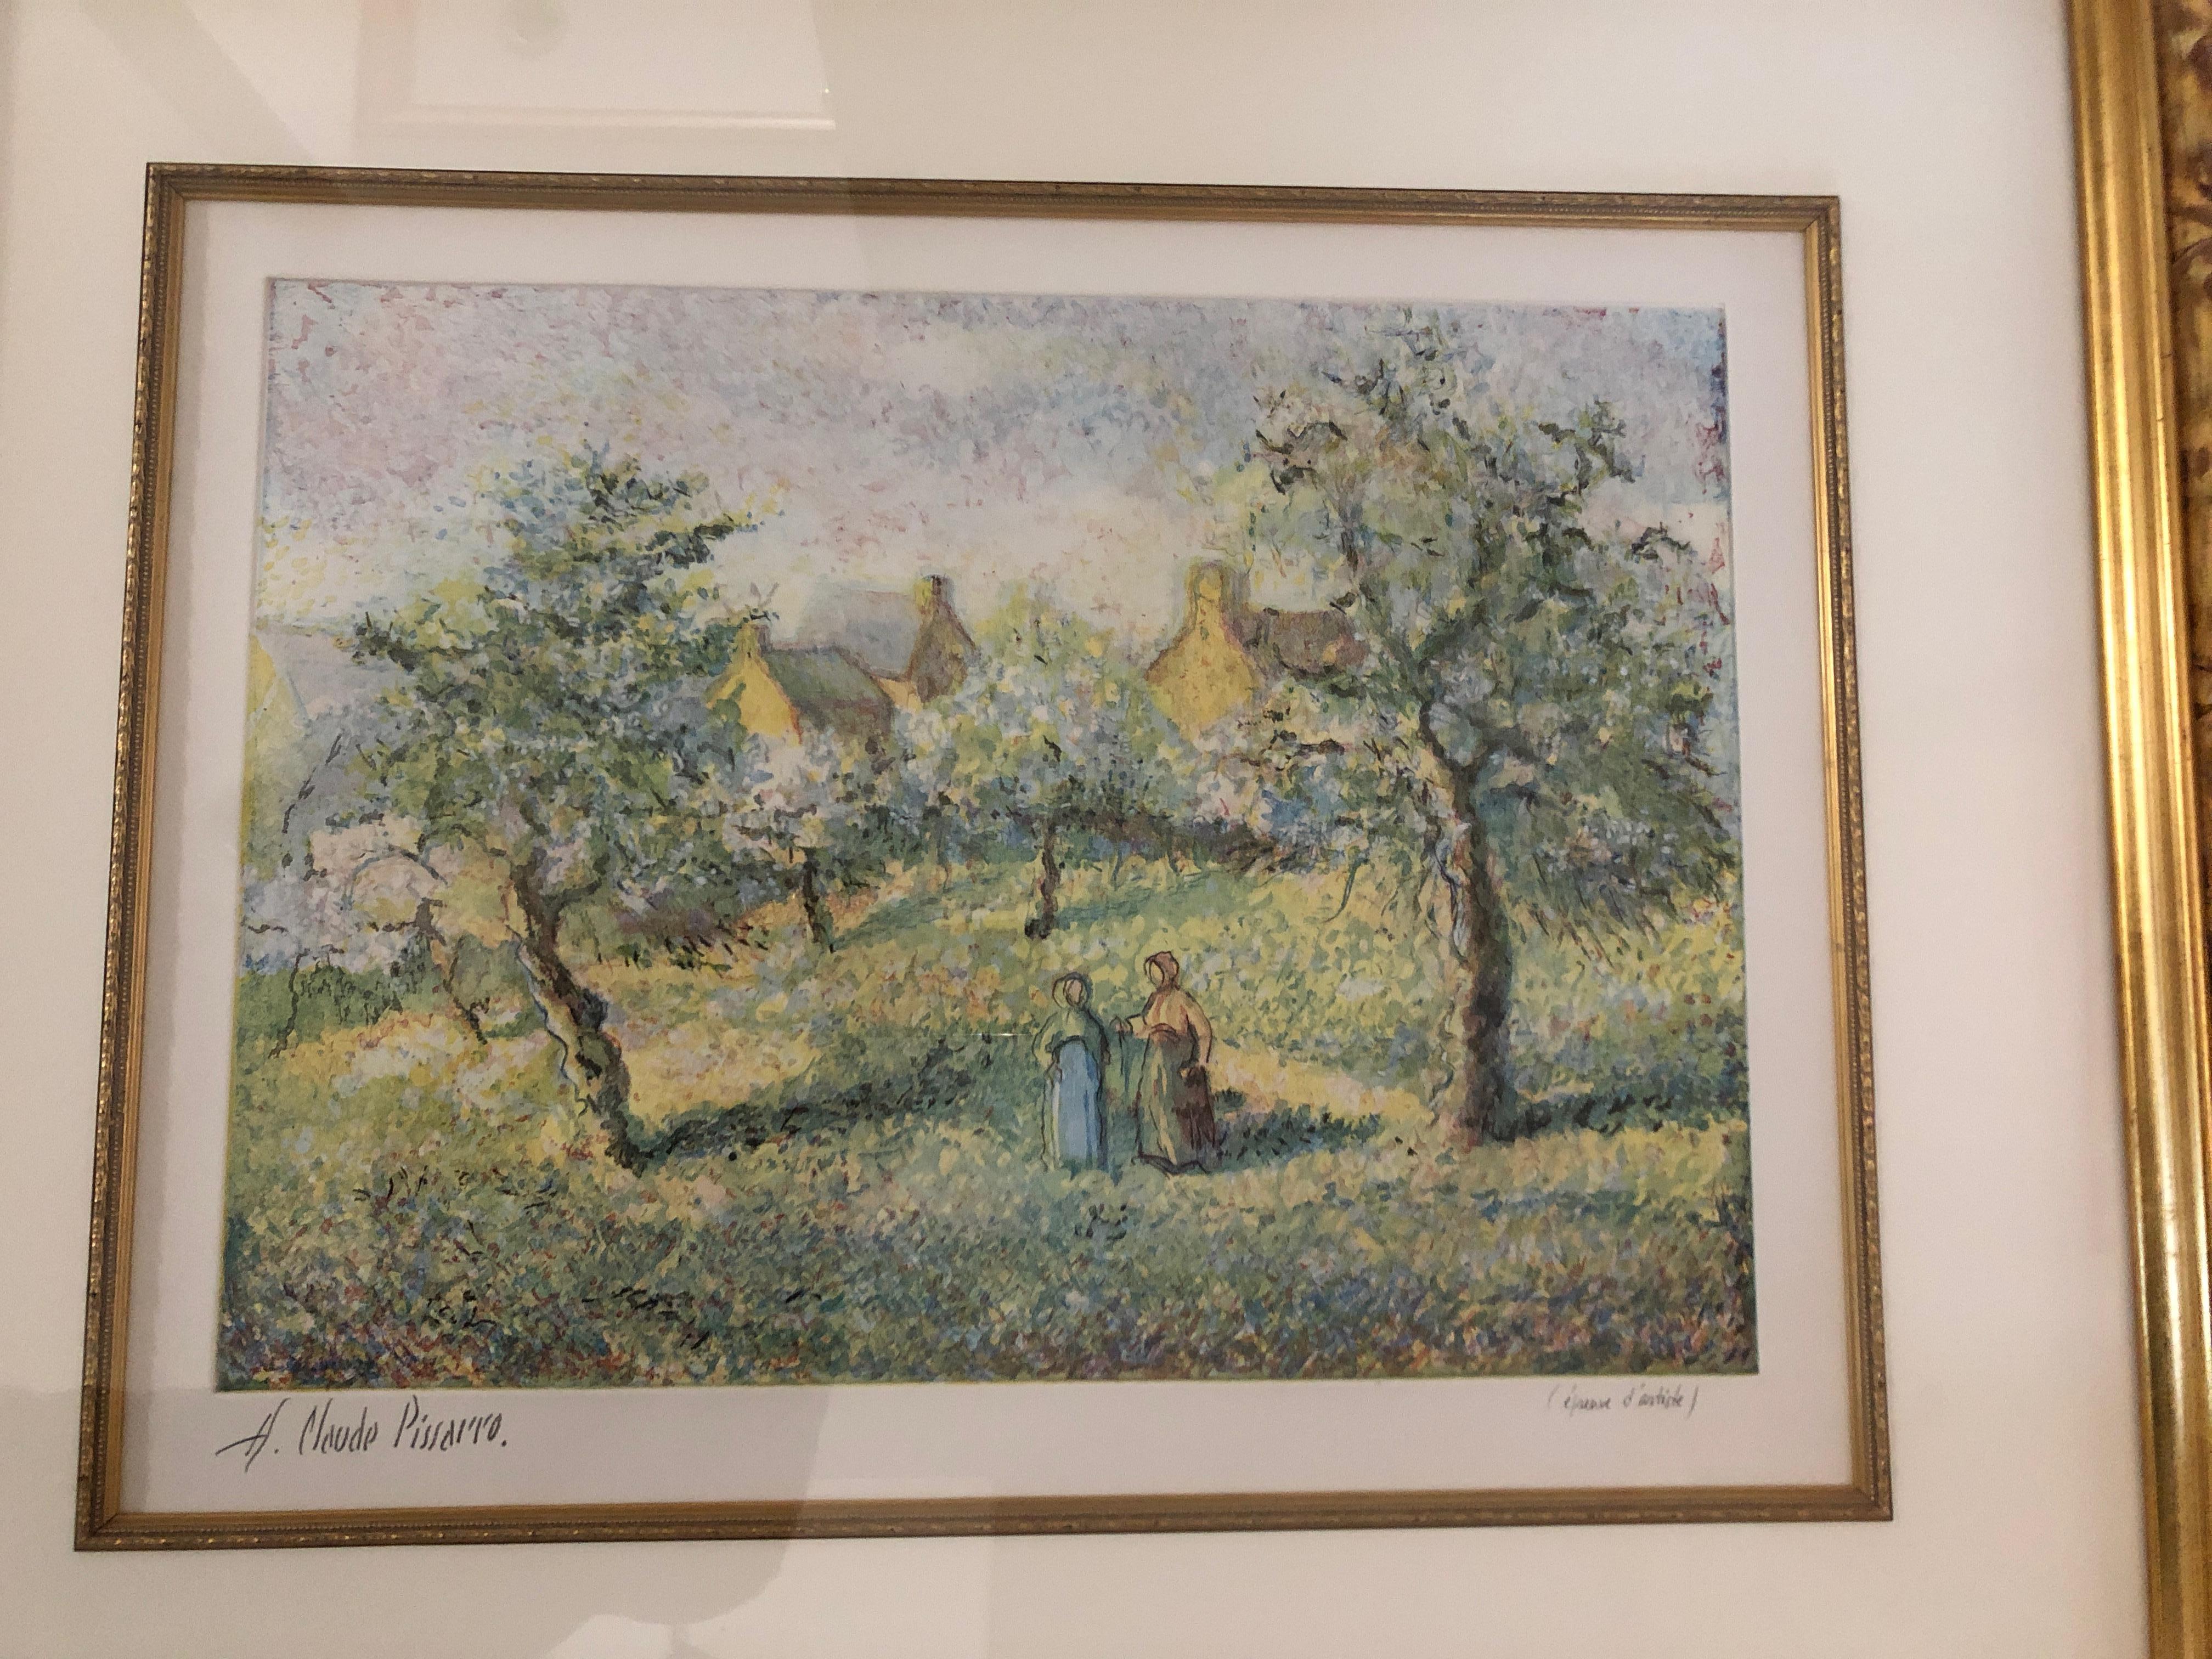 A beautiful pastel colored landscape of trees in bloom (Arbrers en fleurs) with two women walking down a country road. Aquatint by H Claude Pissarro, signed lower left. Gorgeous custom gilded frame, linen mat and interior gold filet. Art measures 19